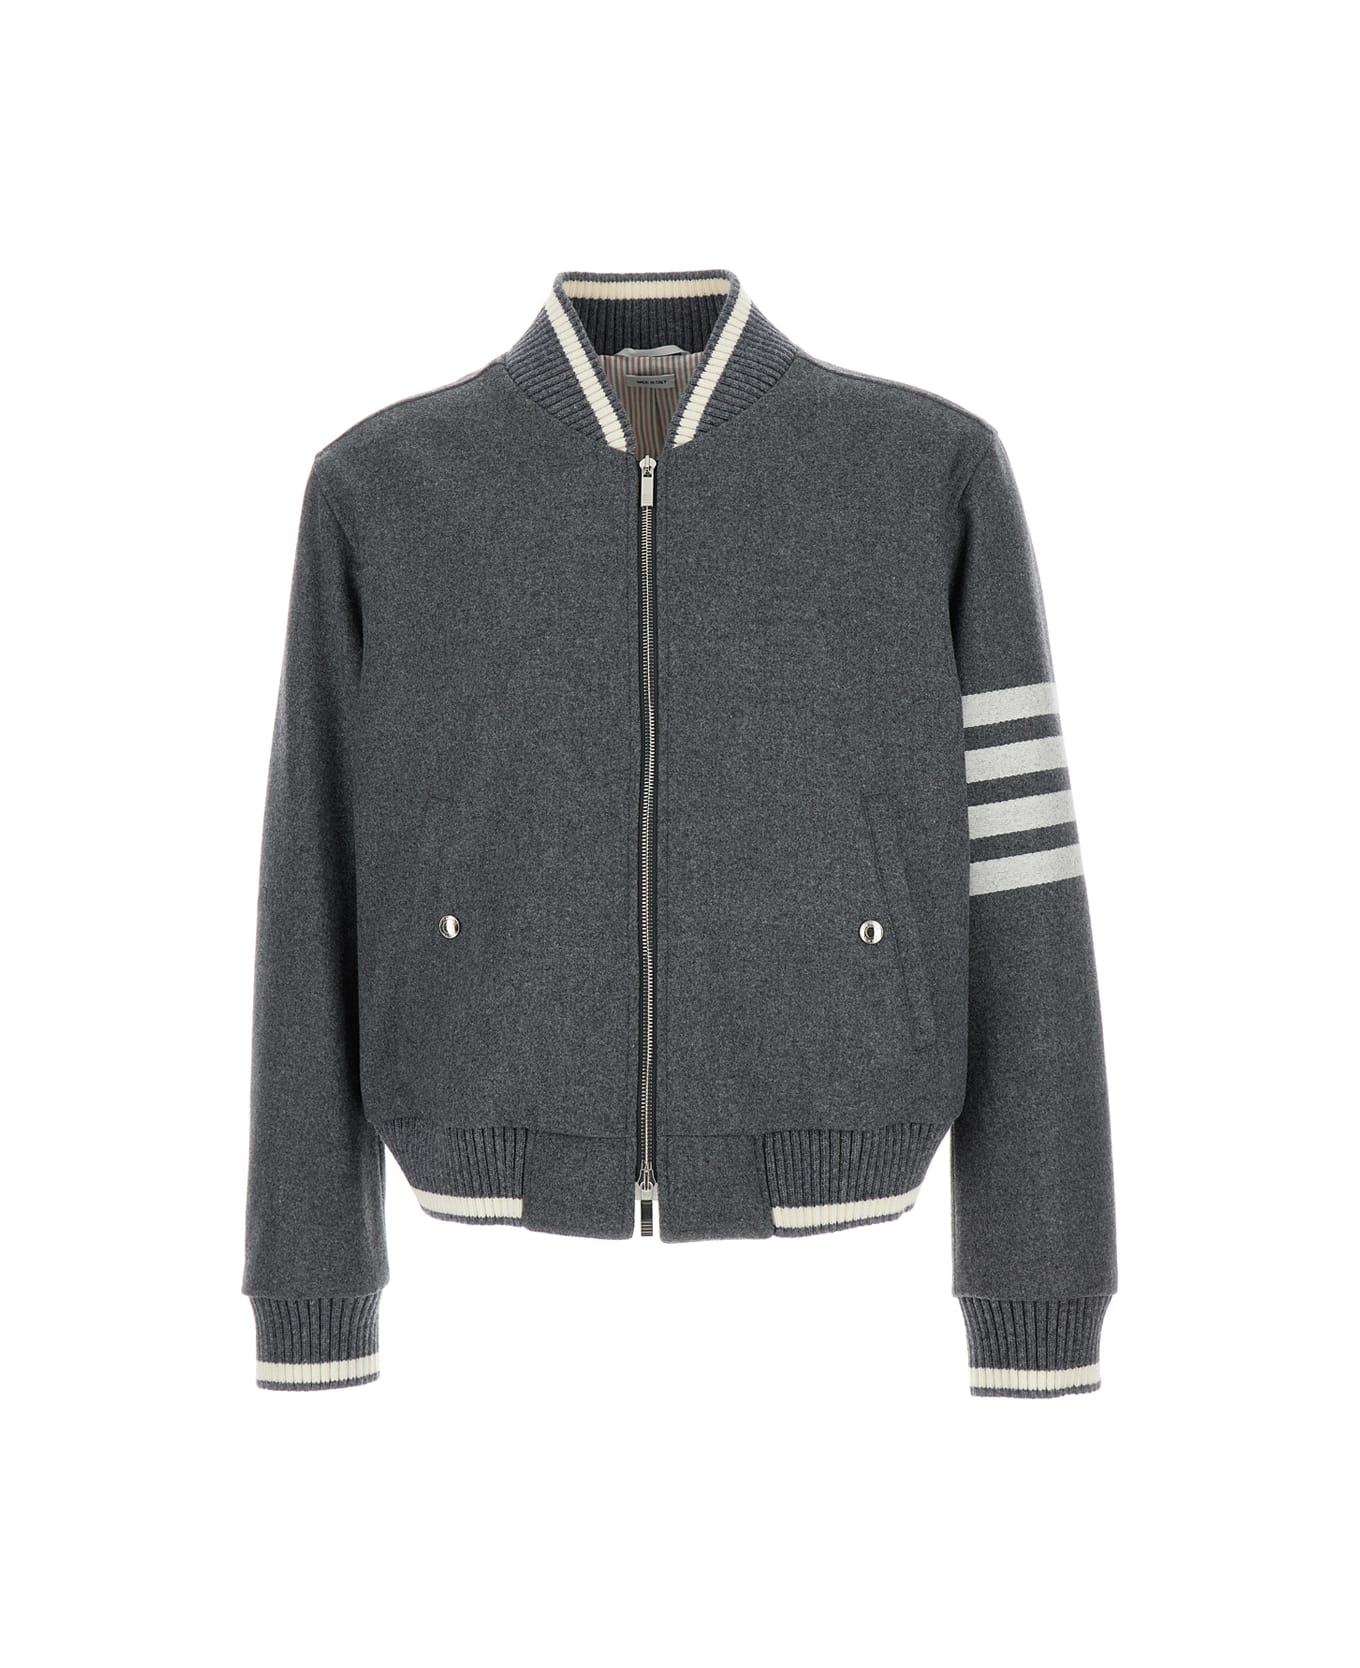 Thom Browne Grey Bomber Jacket With Signature 4bar Stripe In Wool Man - Grey